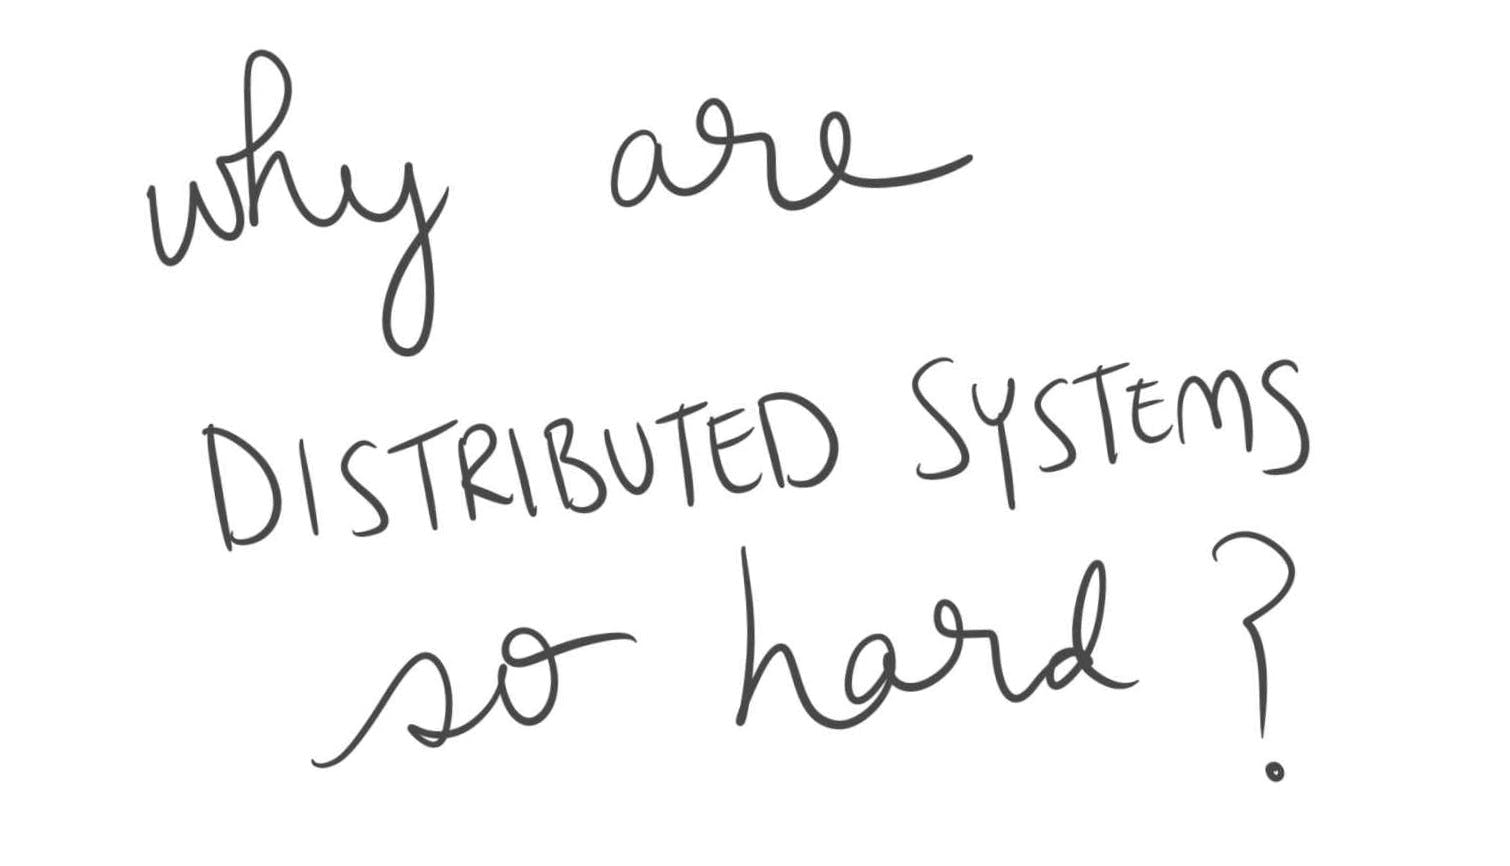 Distributed systems are difficult to manage